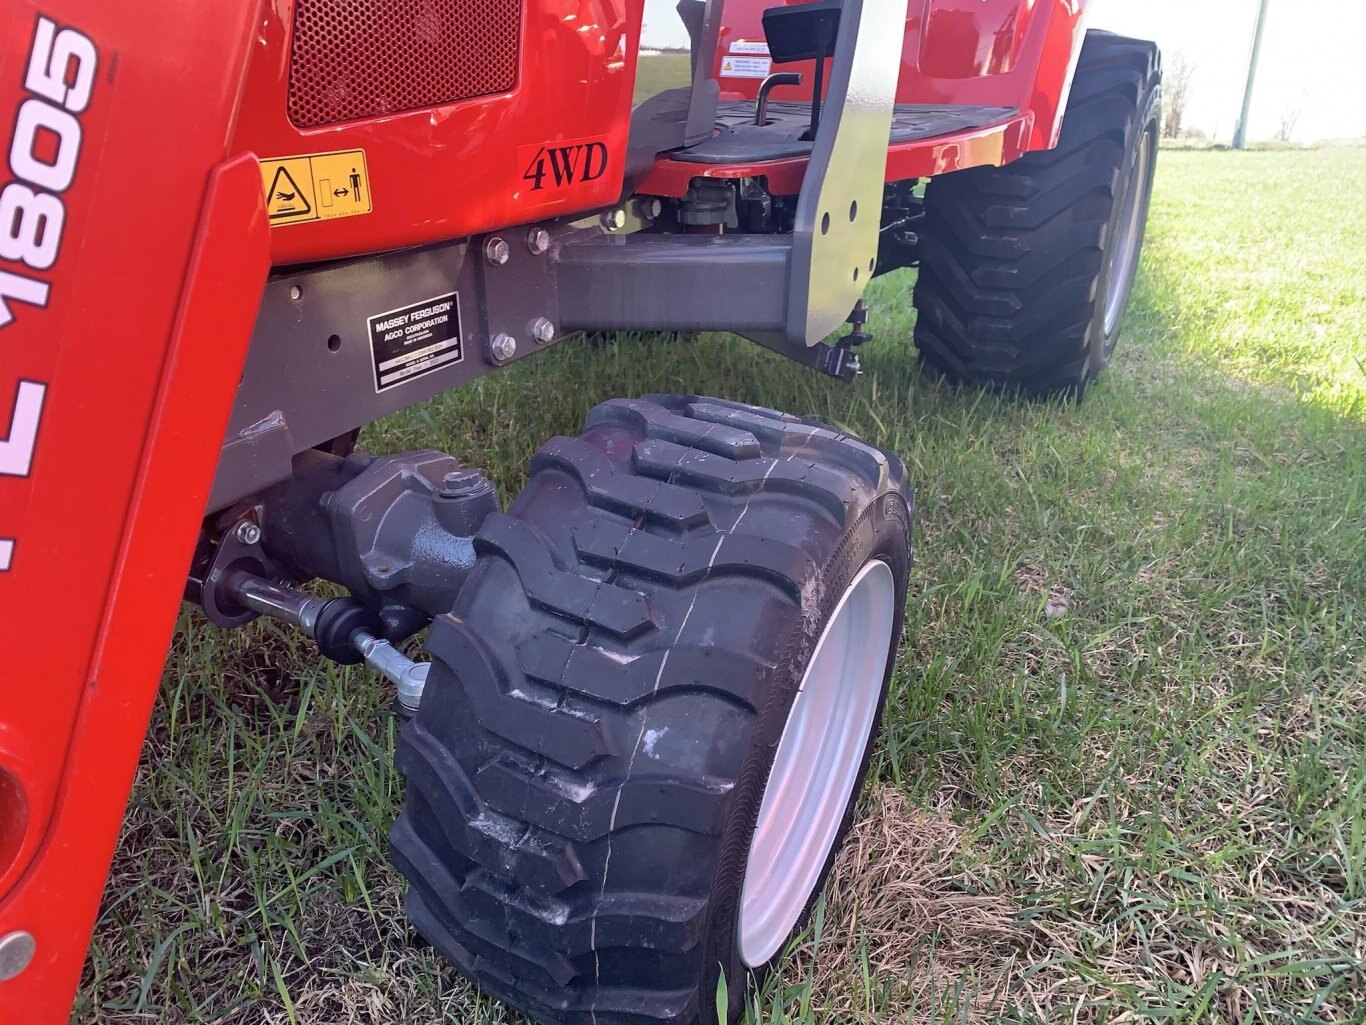 Massey Ferguson GC1723EB Sub Compact with Backhoe and Loader on Industrial Tires